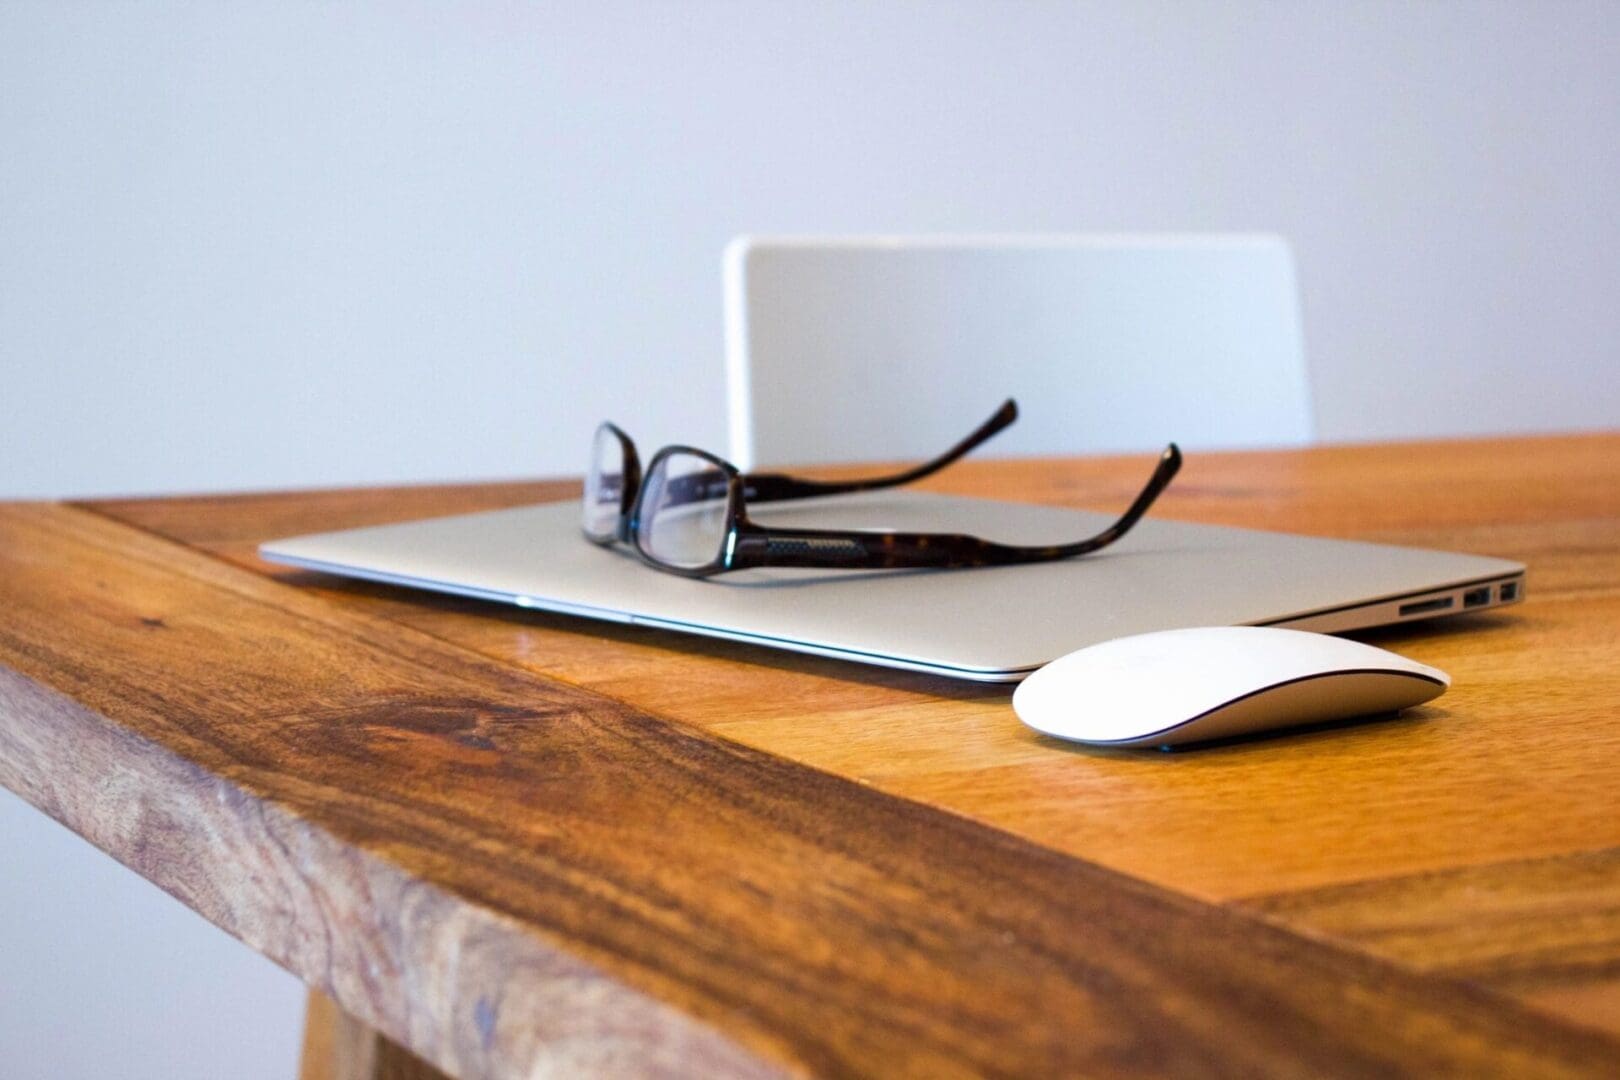 A pair of eyeglasses and a wireless mouse resting on a wooden table beside a closed laptop.